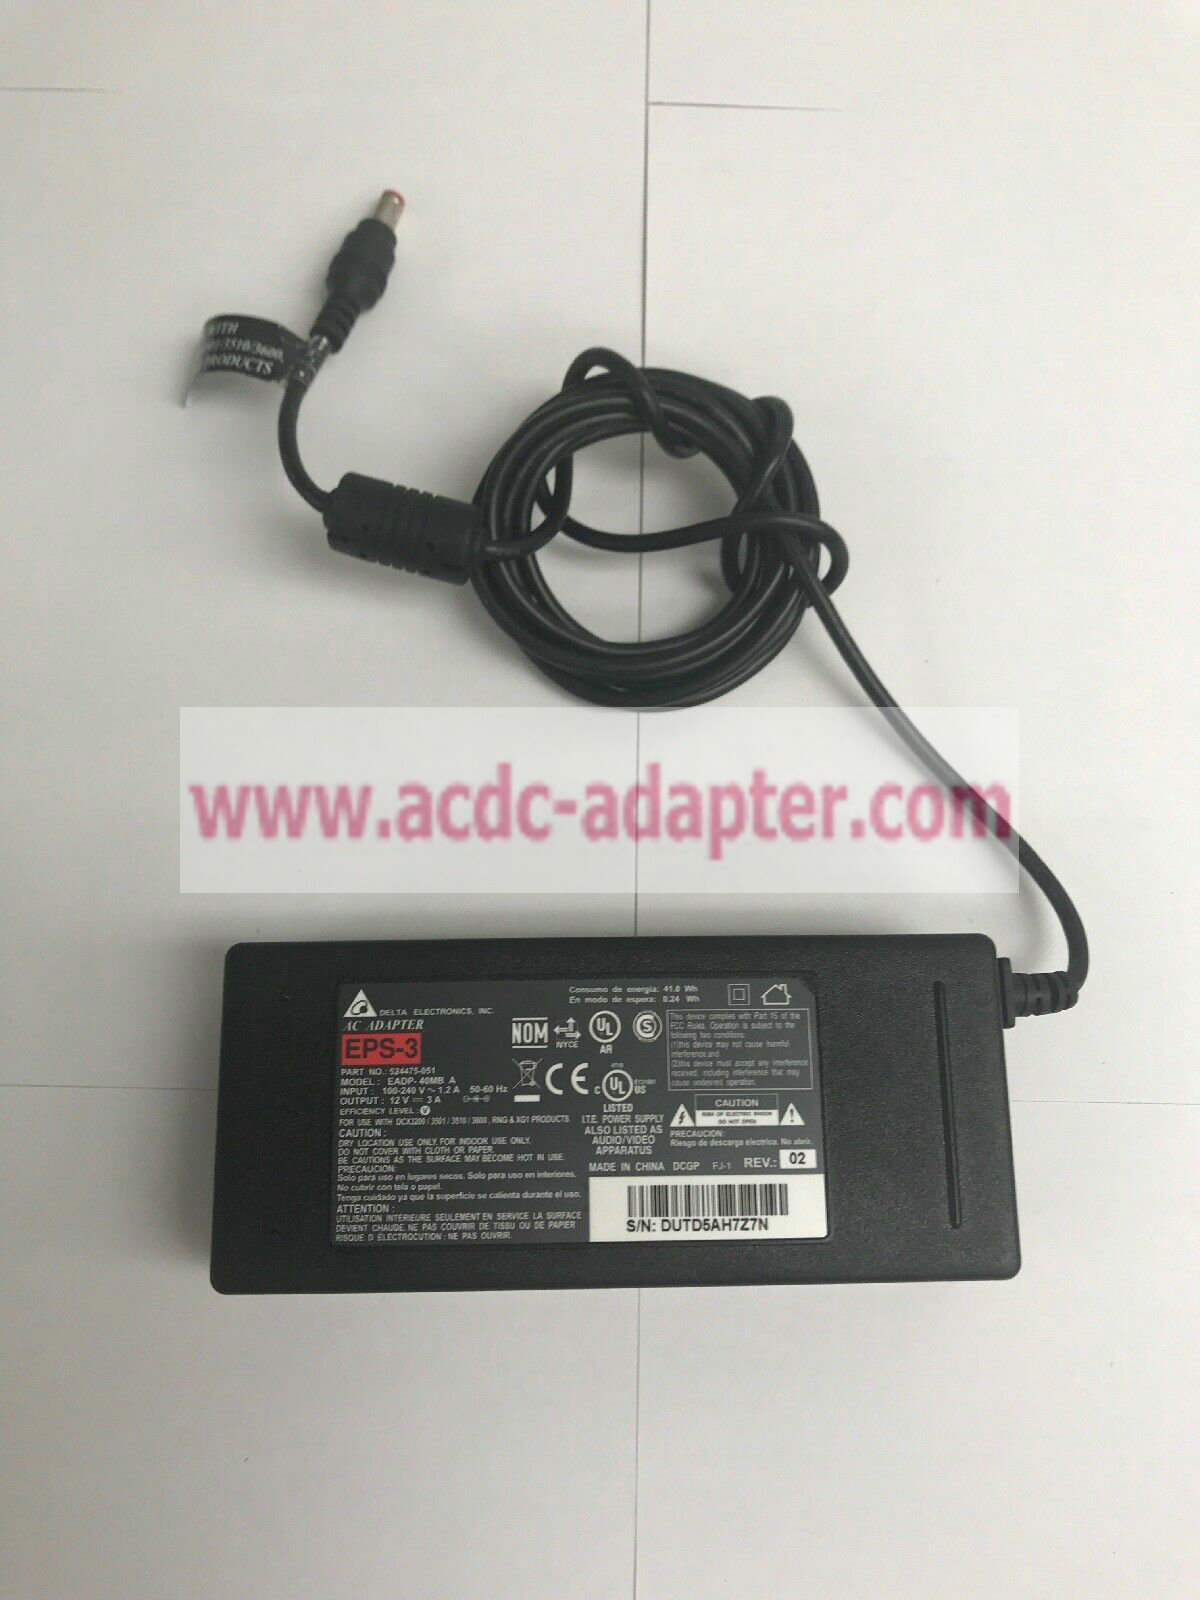 Delta 524475-051 AC POWER ADAPTER AA27130L EADP-40MB A 12V 3A AC CHARGER